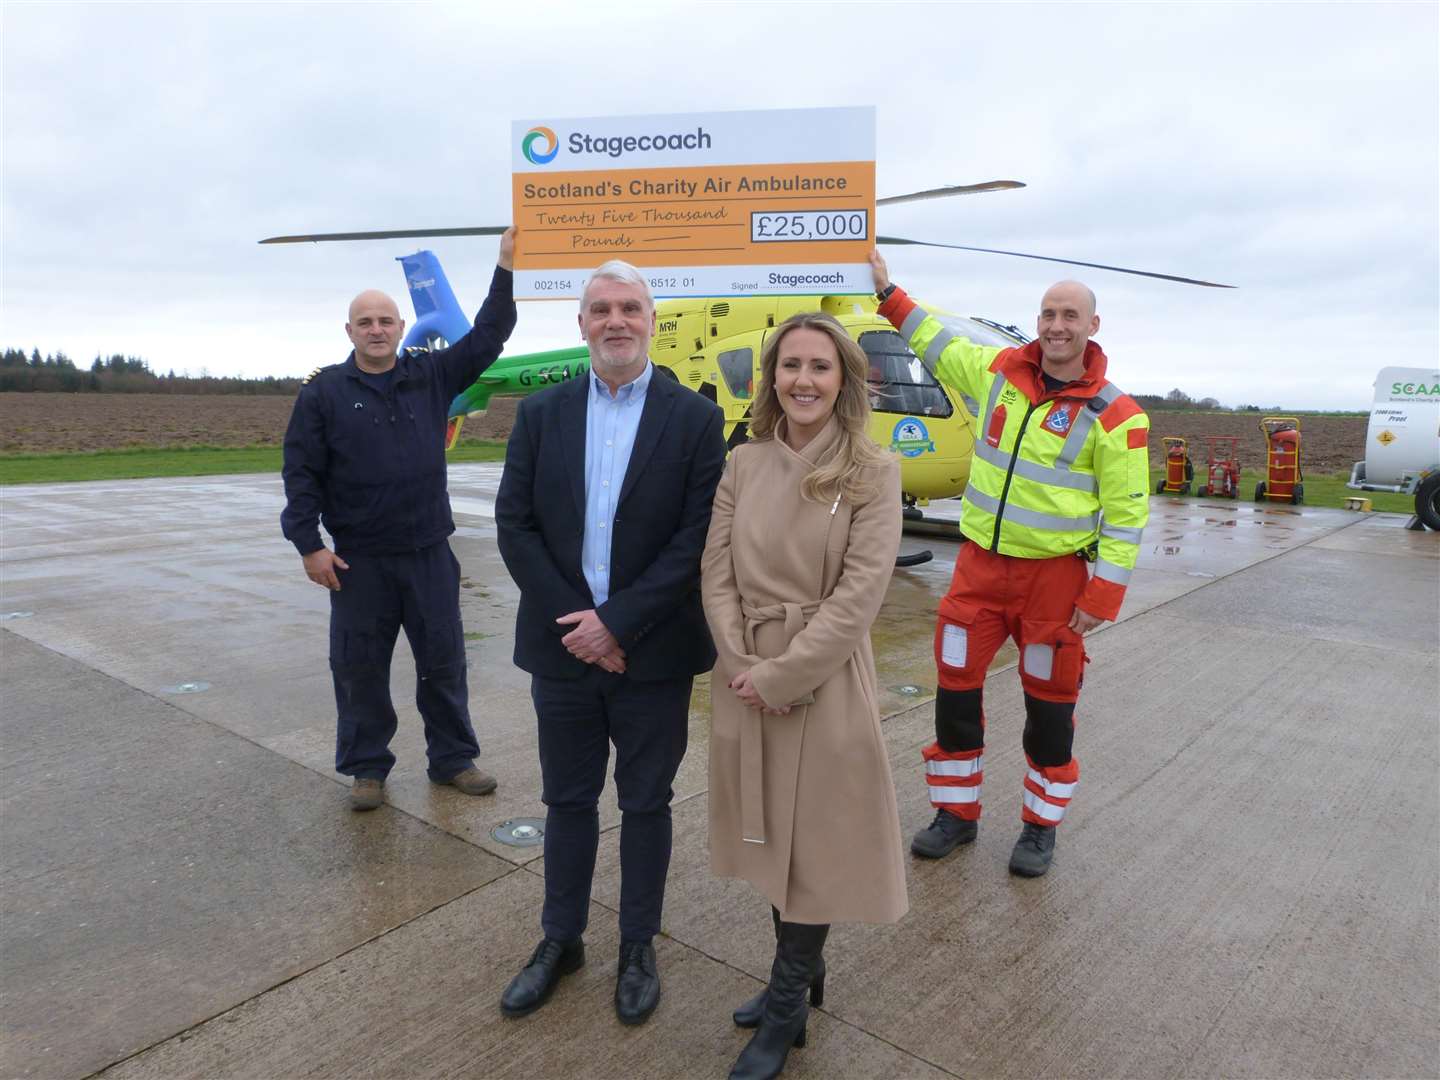 Stagecoach has donated £25,000 to the Scottish Charity Air Ambulance.